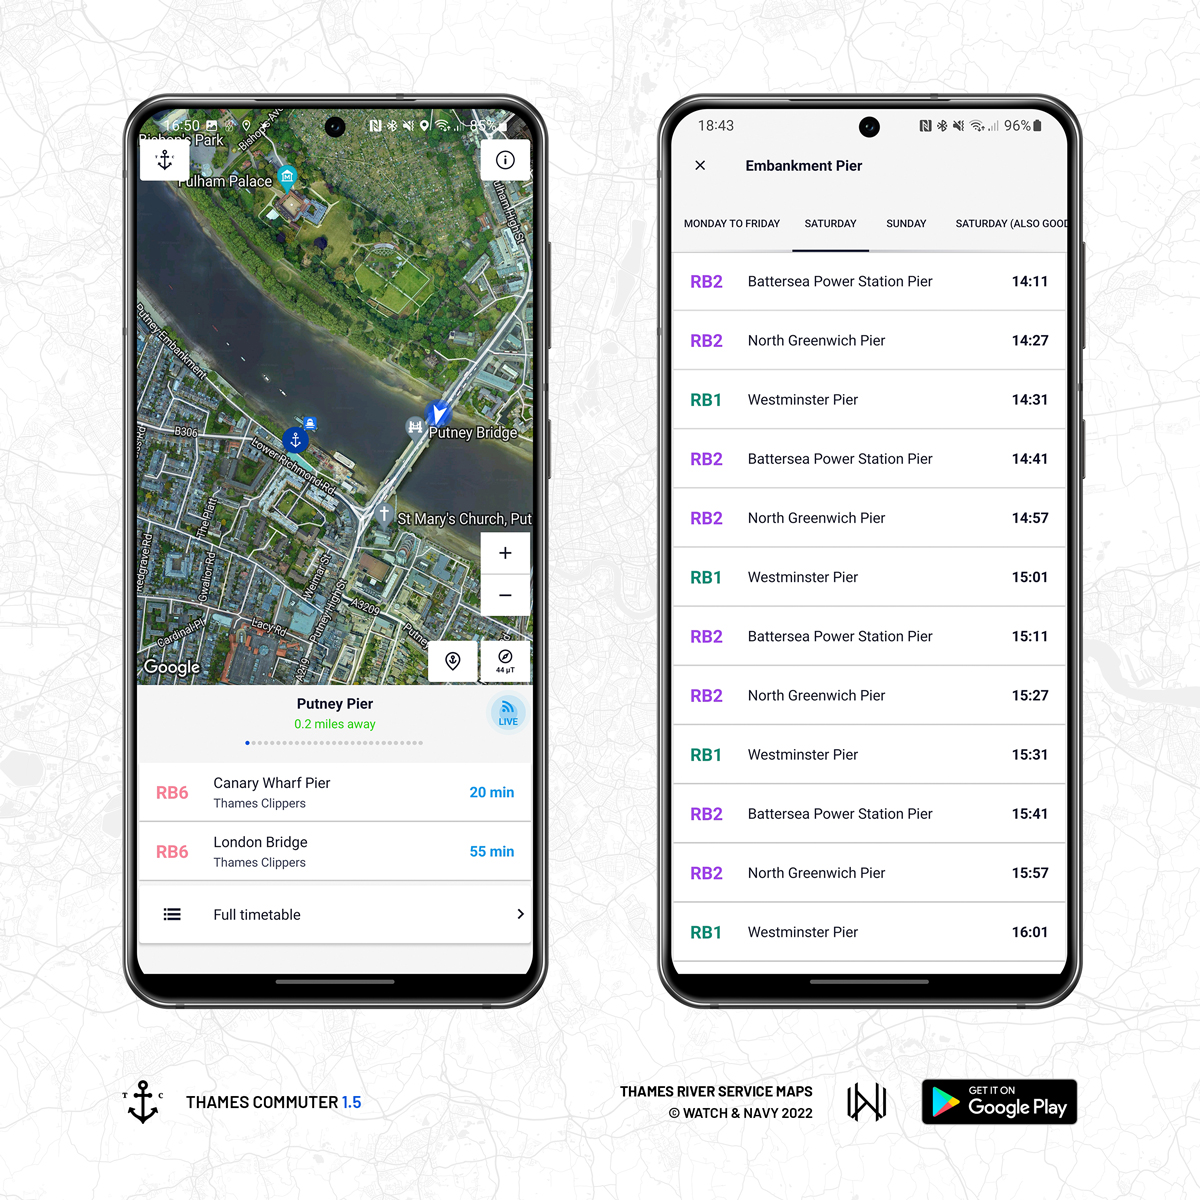 Live arrivals and route maps – Thames Commuter 1.5 for Android and Wear OS